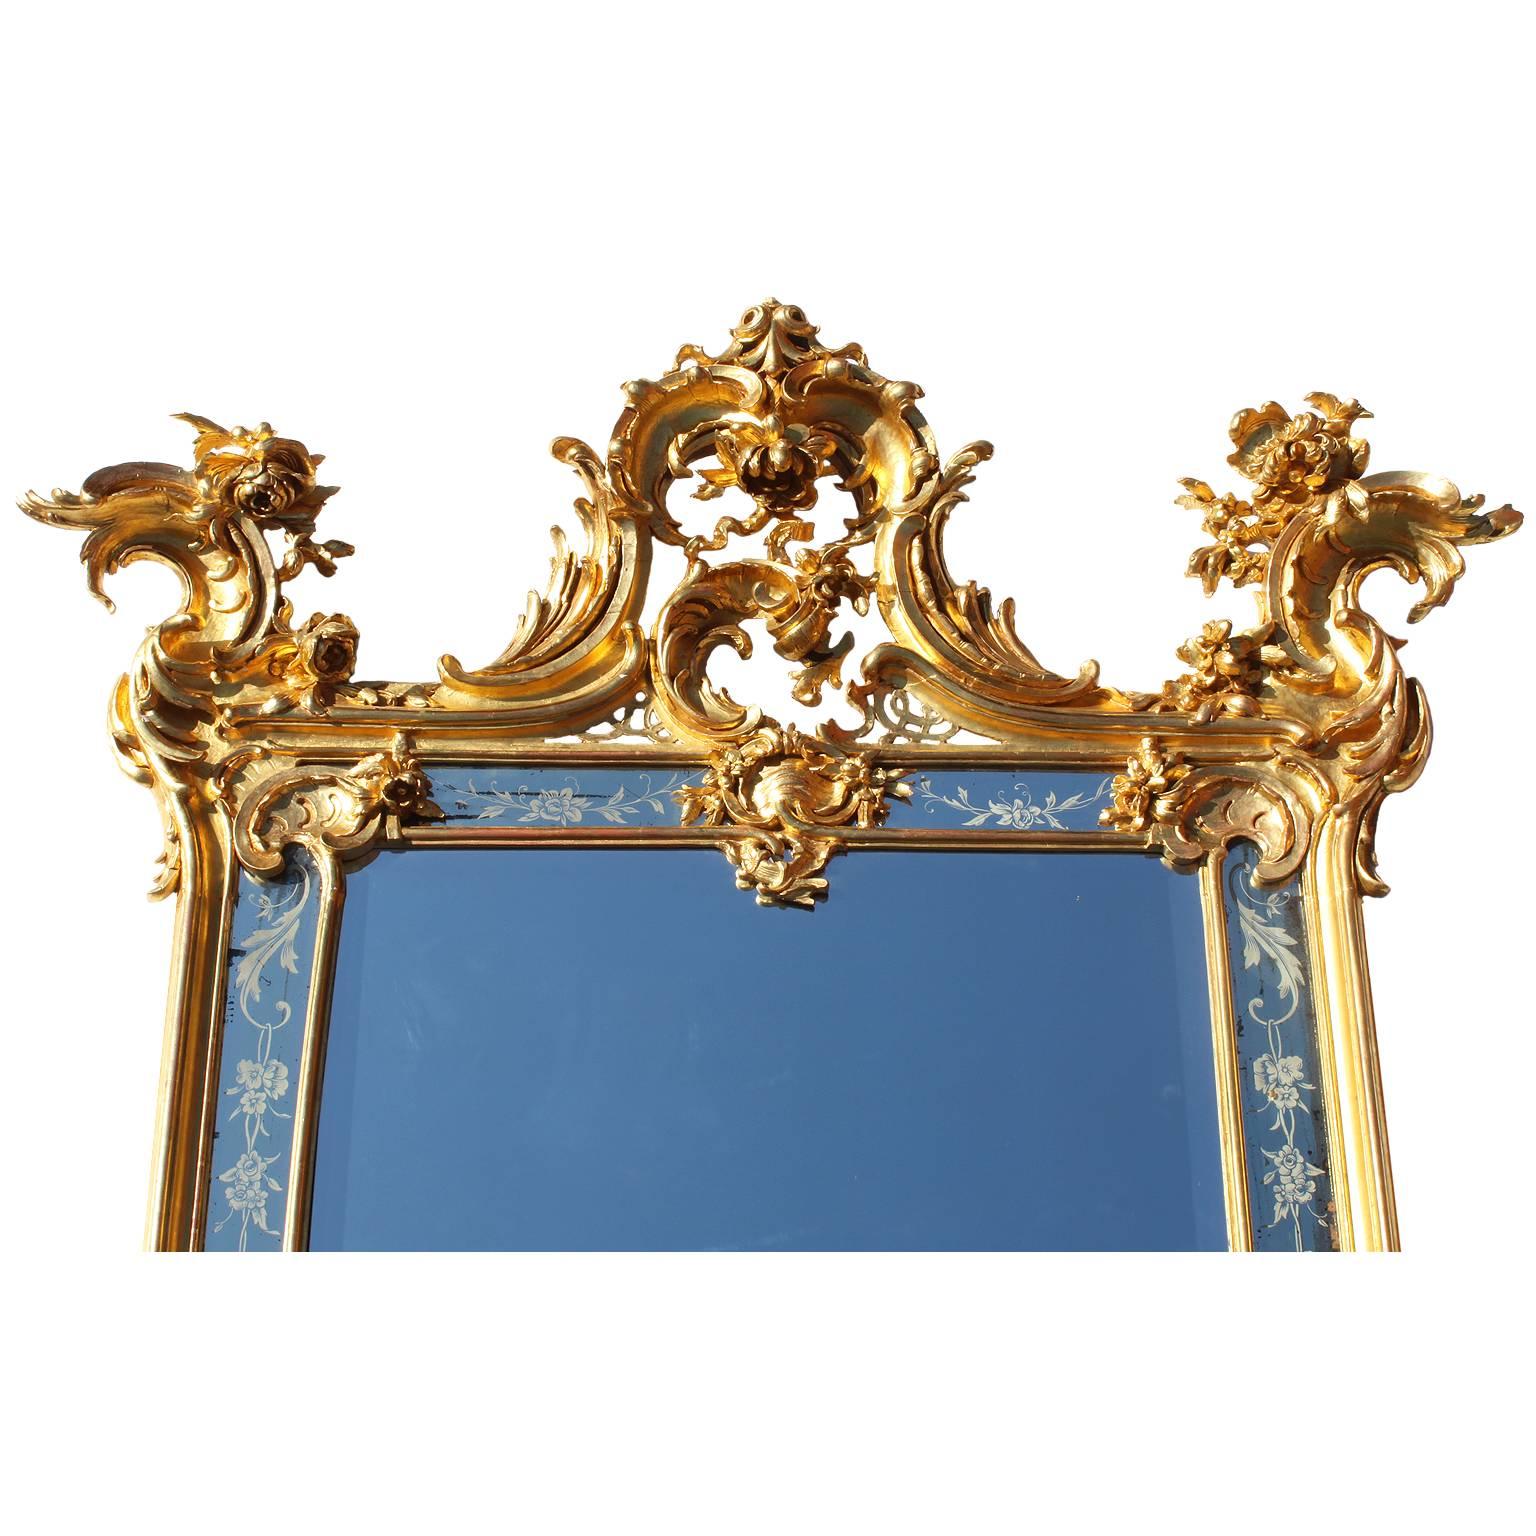 Very Fine Pair of French 19th Century Rococo Style Giltwood Carved Pier Mirrors In Fair Condition For Sale In Los Angeles, CA